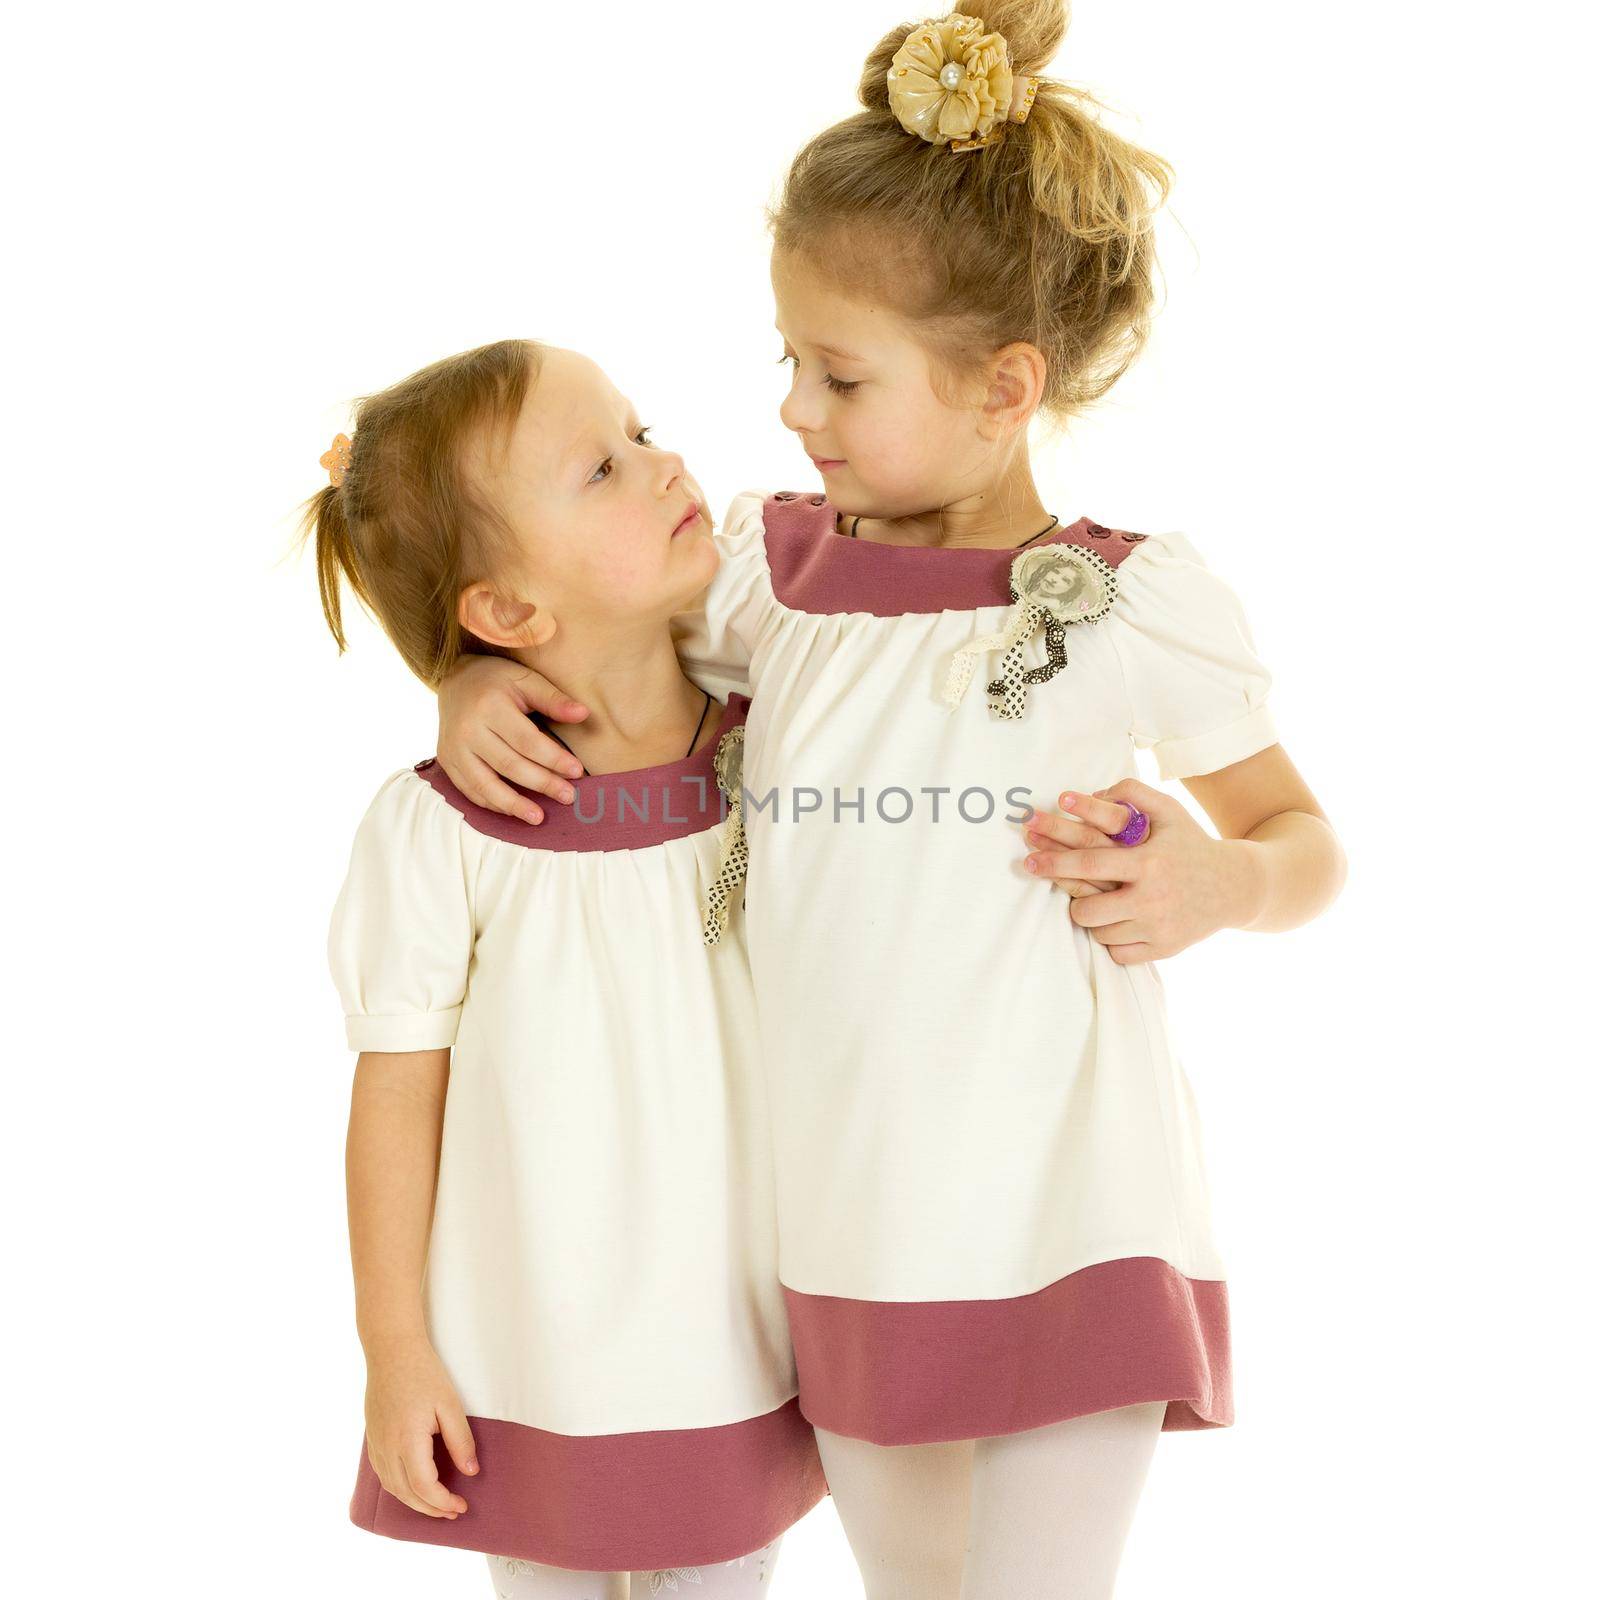 Cute adorable little sisters standing and hugging. Lovely girls dressed in the same dresses looking at each other against white background. Two happy kids embracing each other